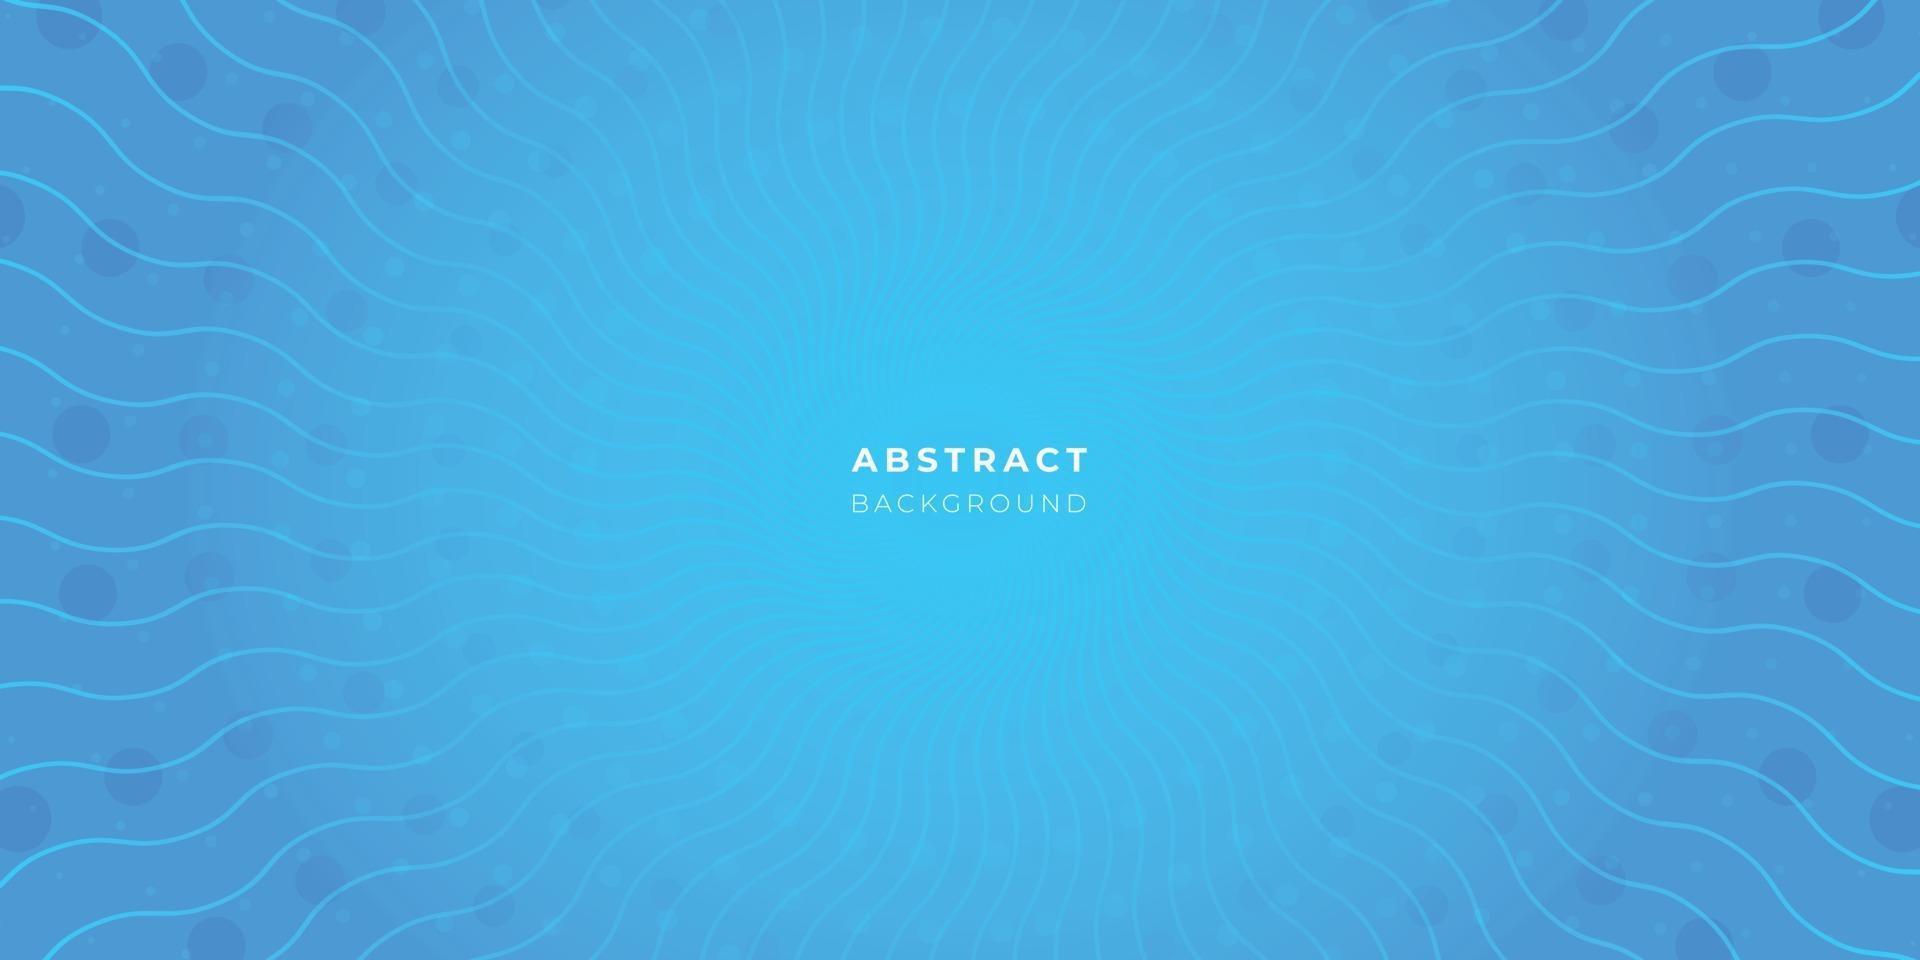 abstract blue background design template vector